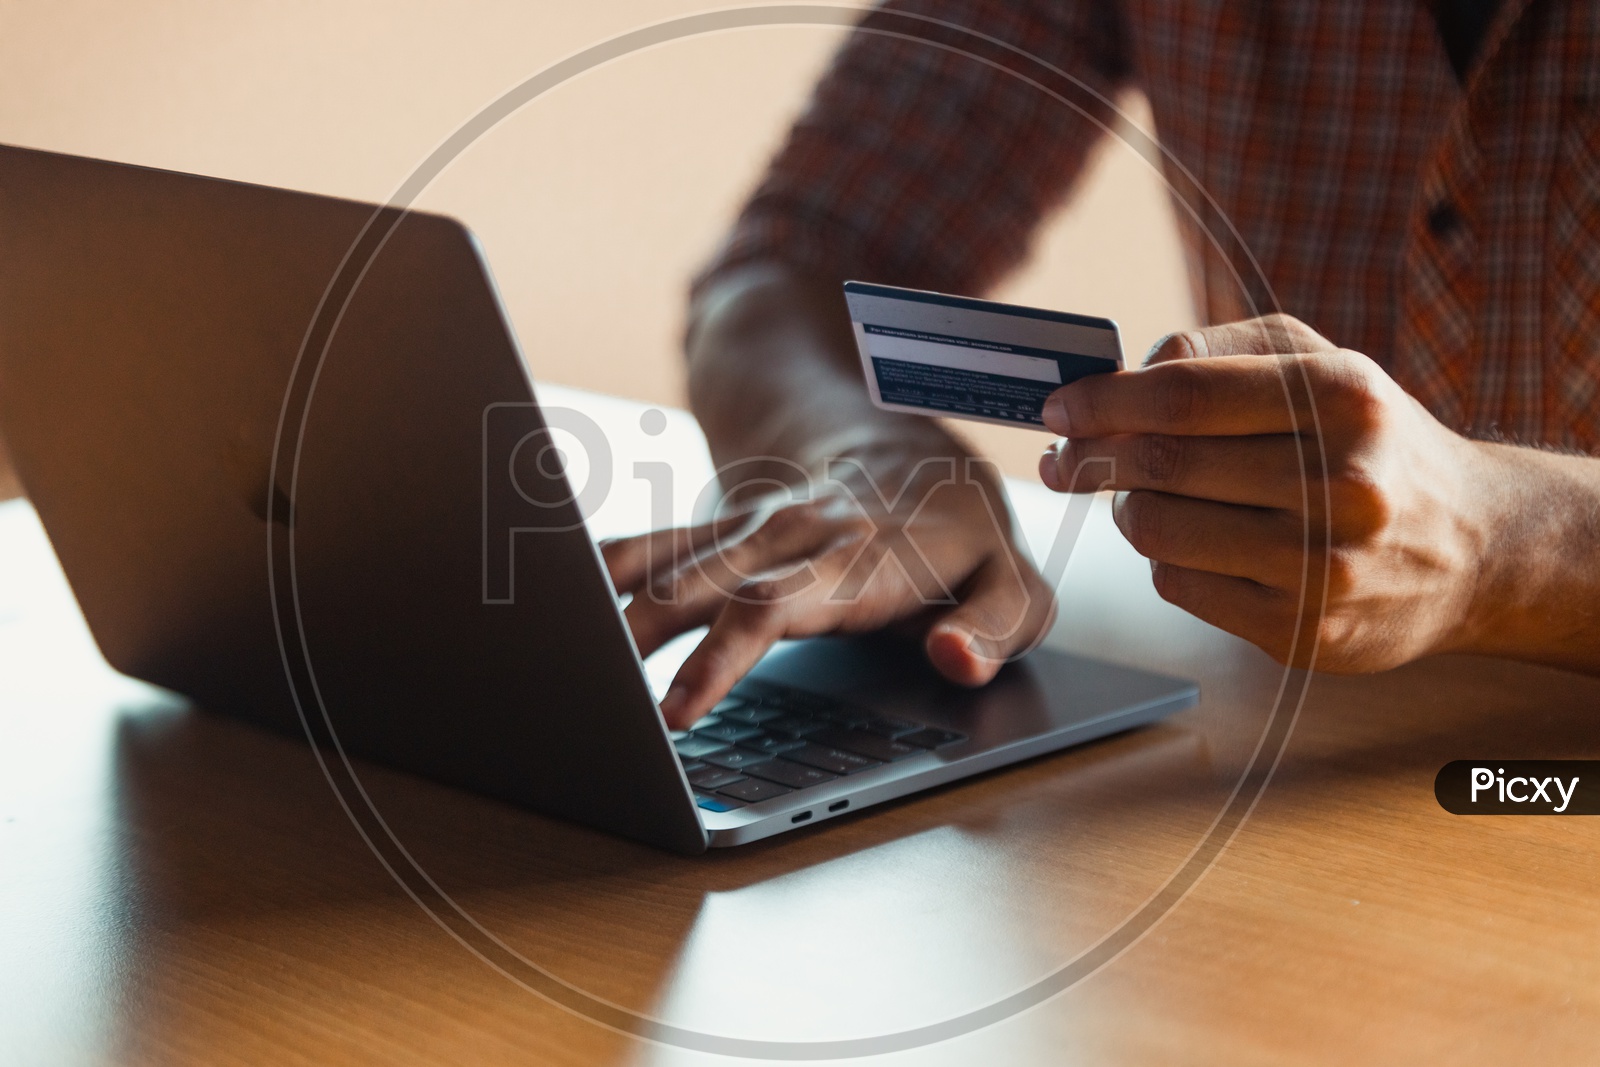 Online Payments Or Online Shopping  A Young Man Using Debit or Credit Card For Online Transaction or Payments in Laptop computer